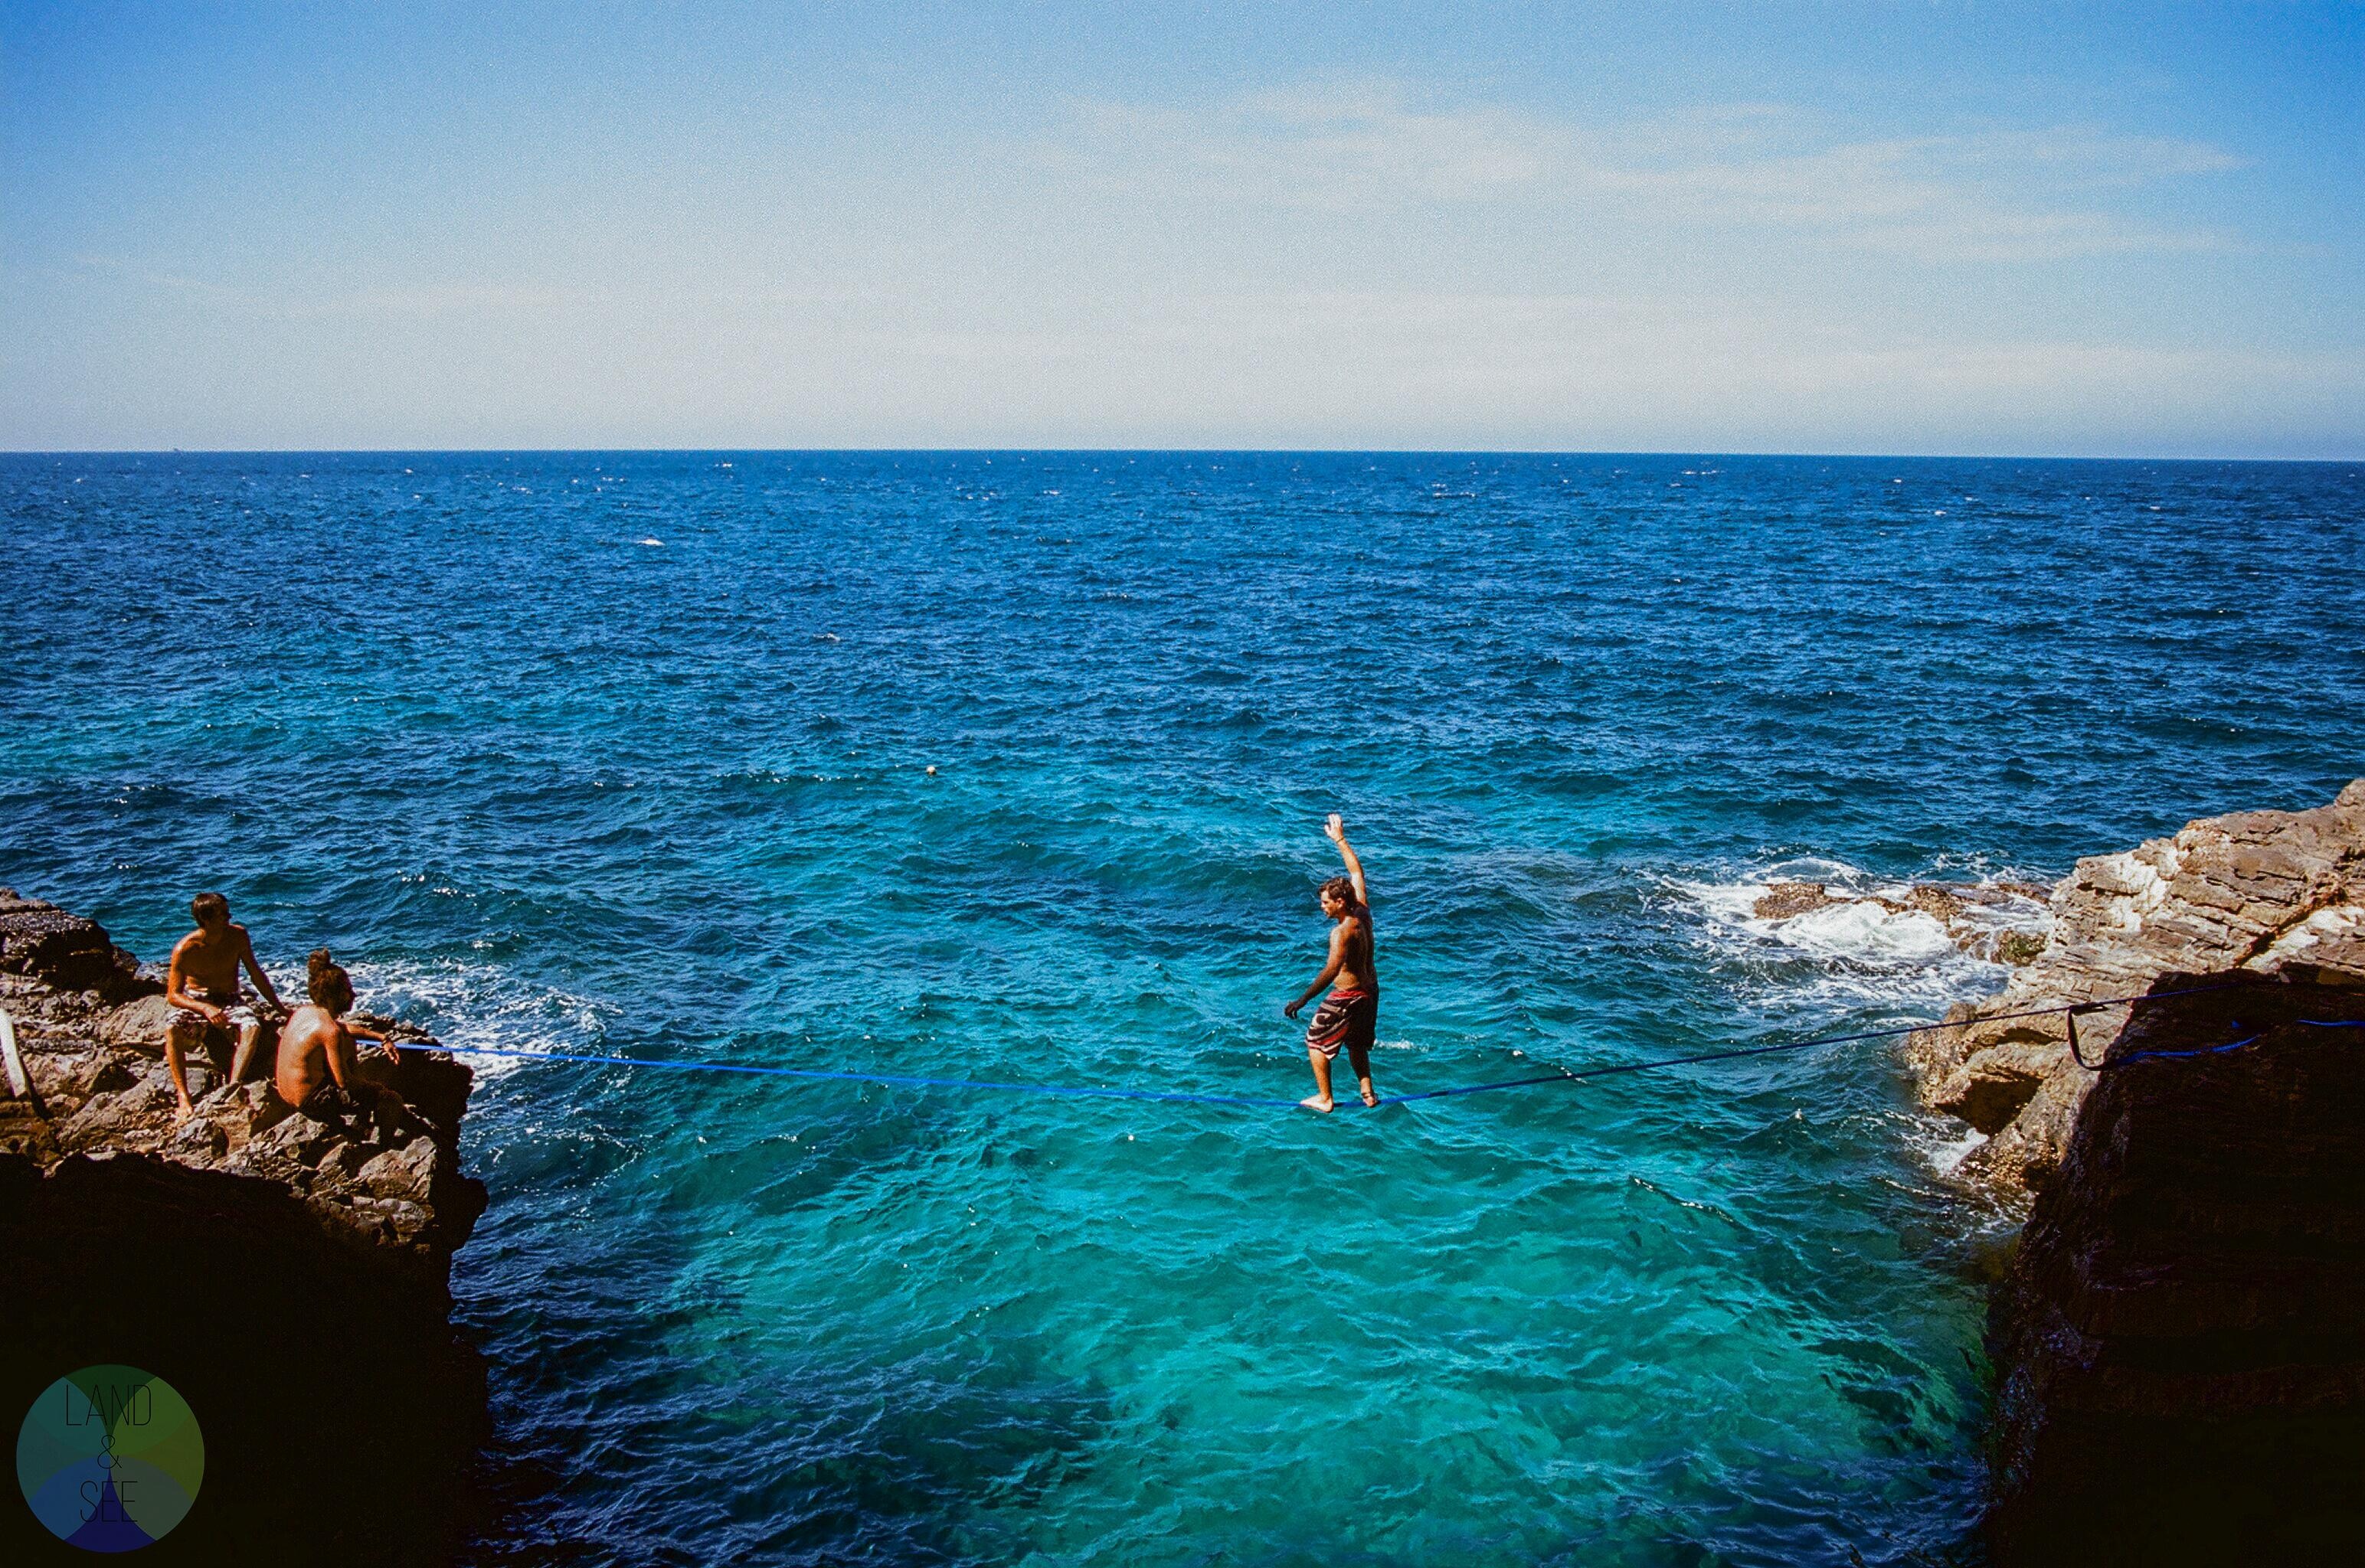 Slacklining: Slacklining over crystal clear blue water, Malaysia, An extreme sport for the daring few. 3090x2050 HD Background.